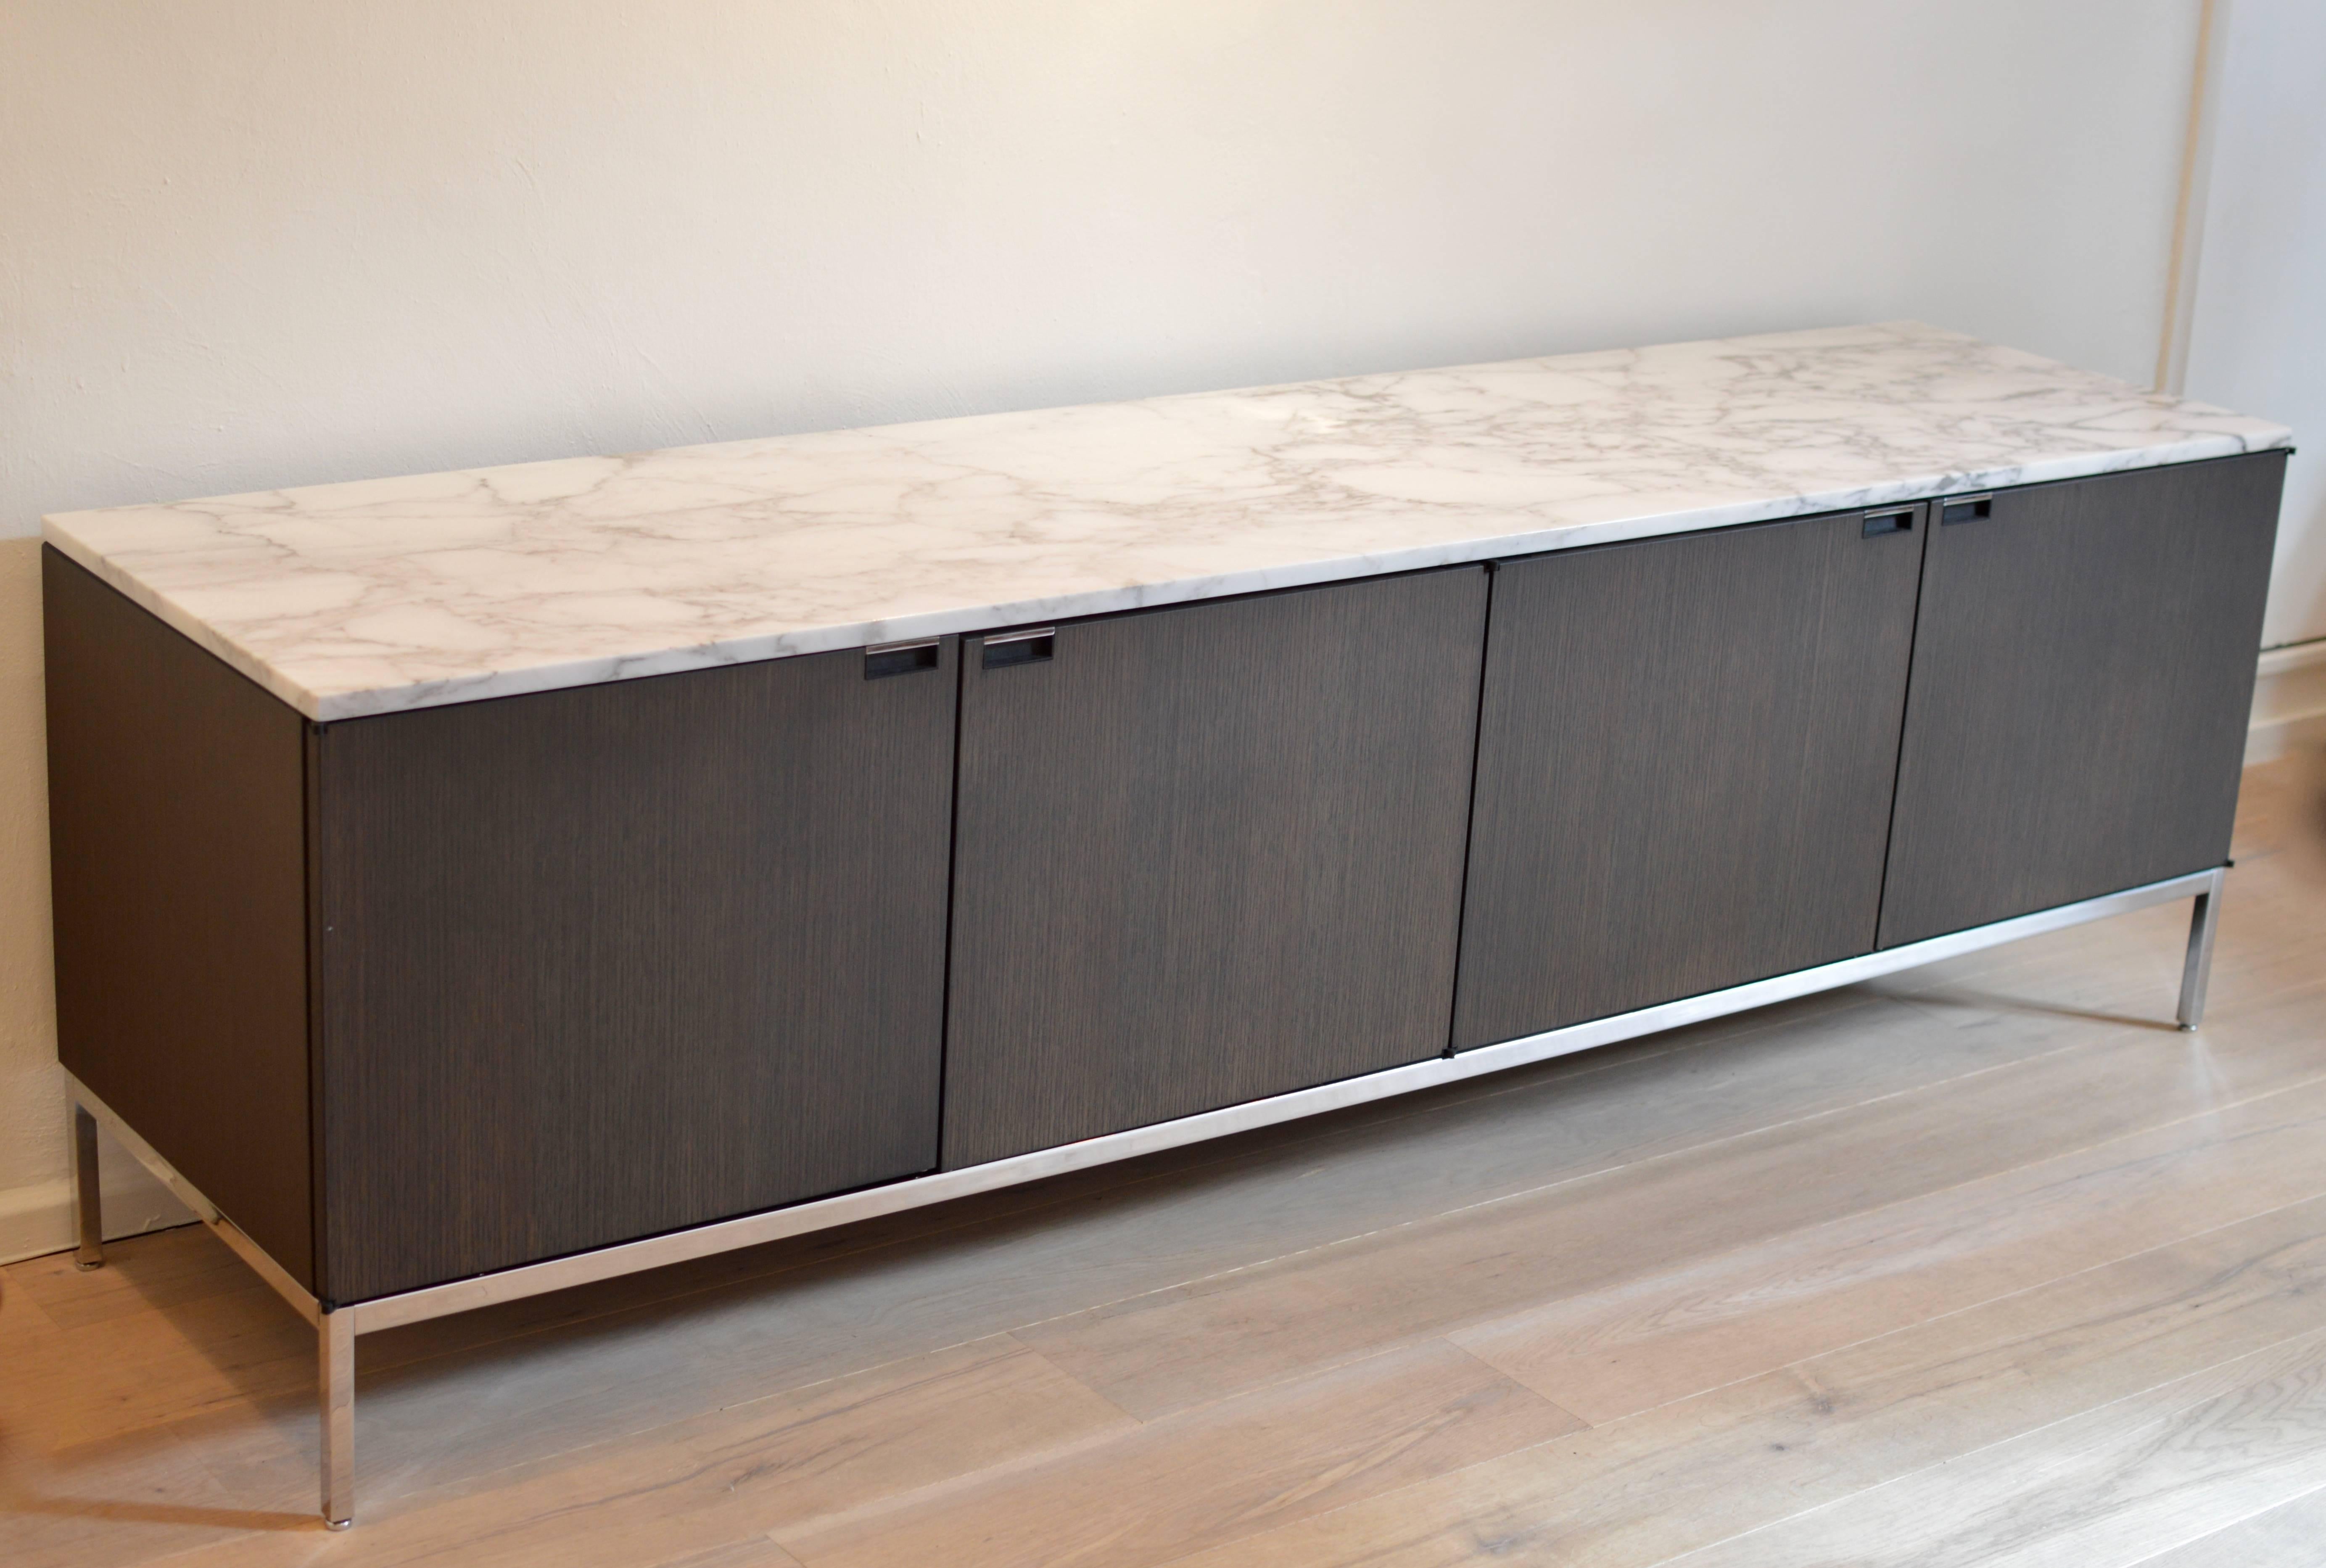 Fully equipped four drawer credenza by Florence Knoll with marble top executed in grey stained oak on chrome base with Arabescato (white with grey veining) marble-top.
Left compartment comes with two large shelves (half the size of the credenza),